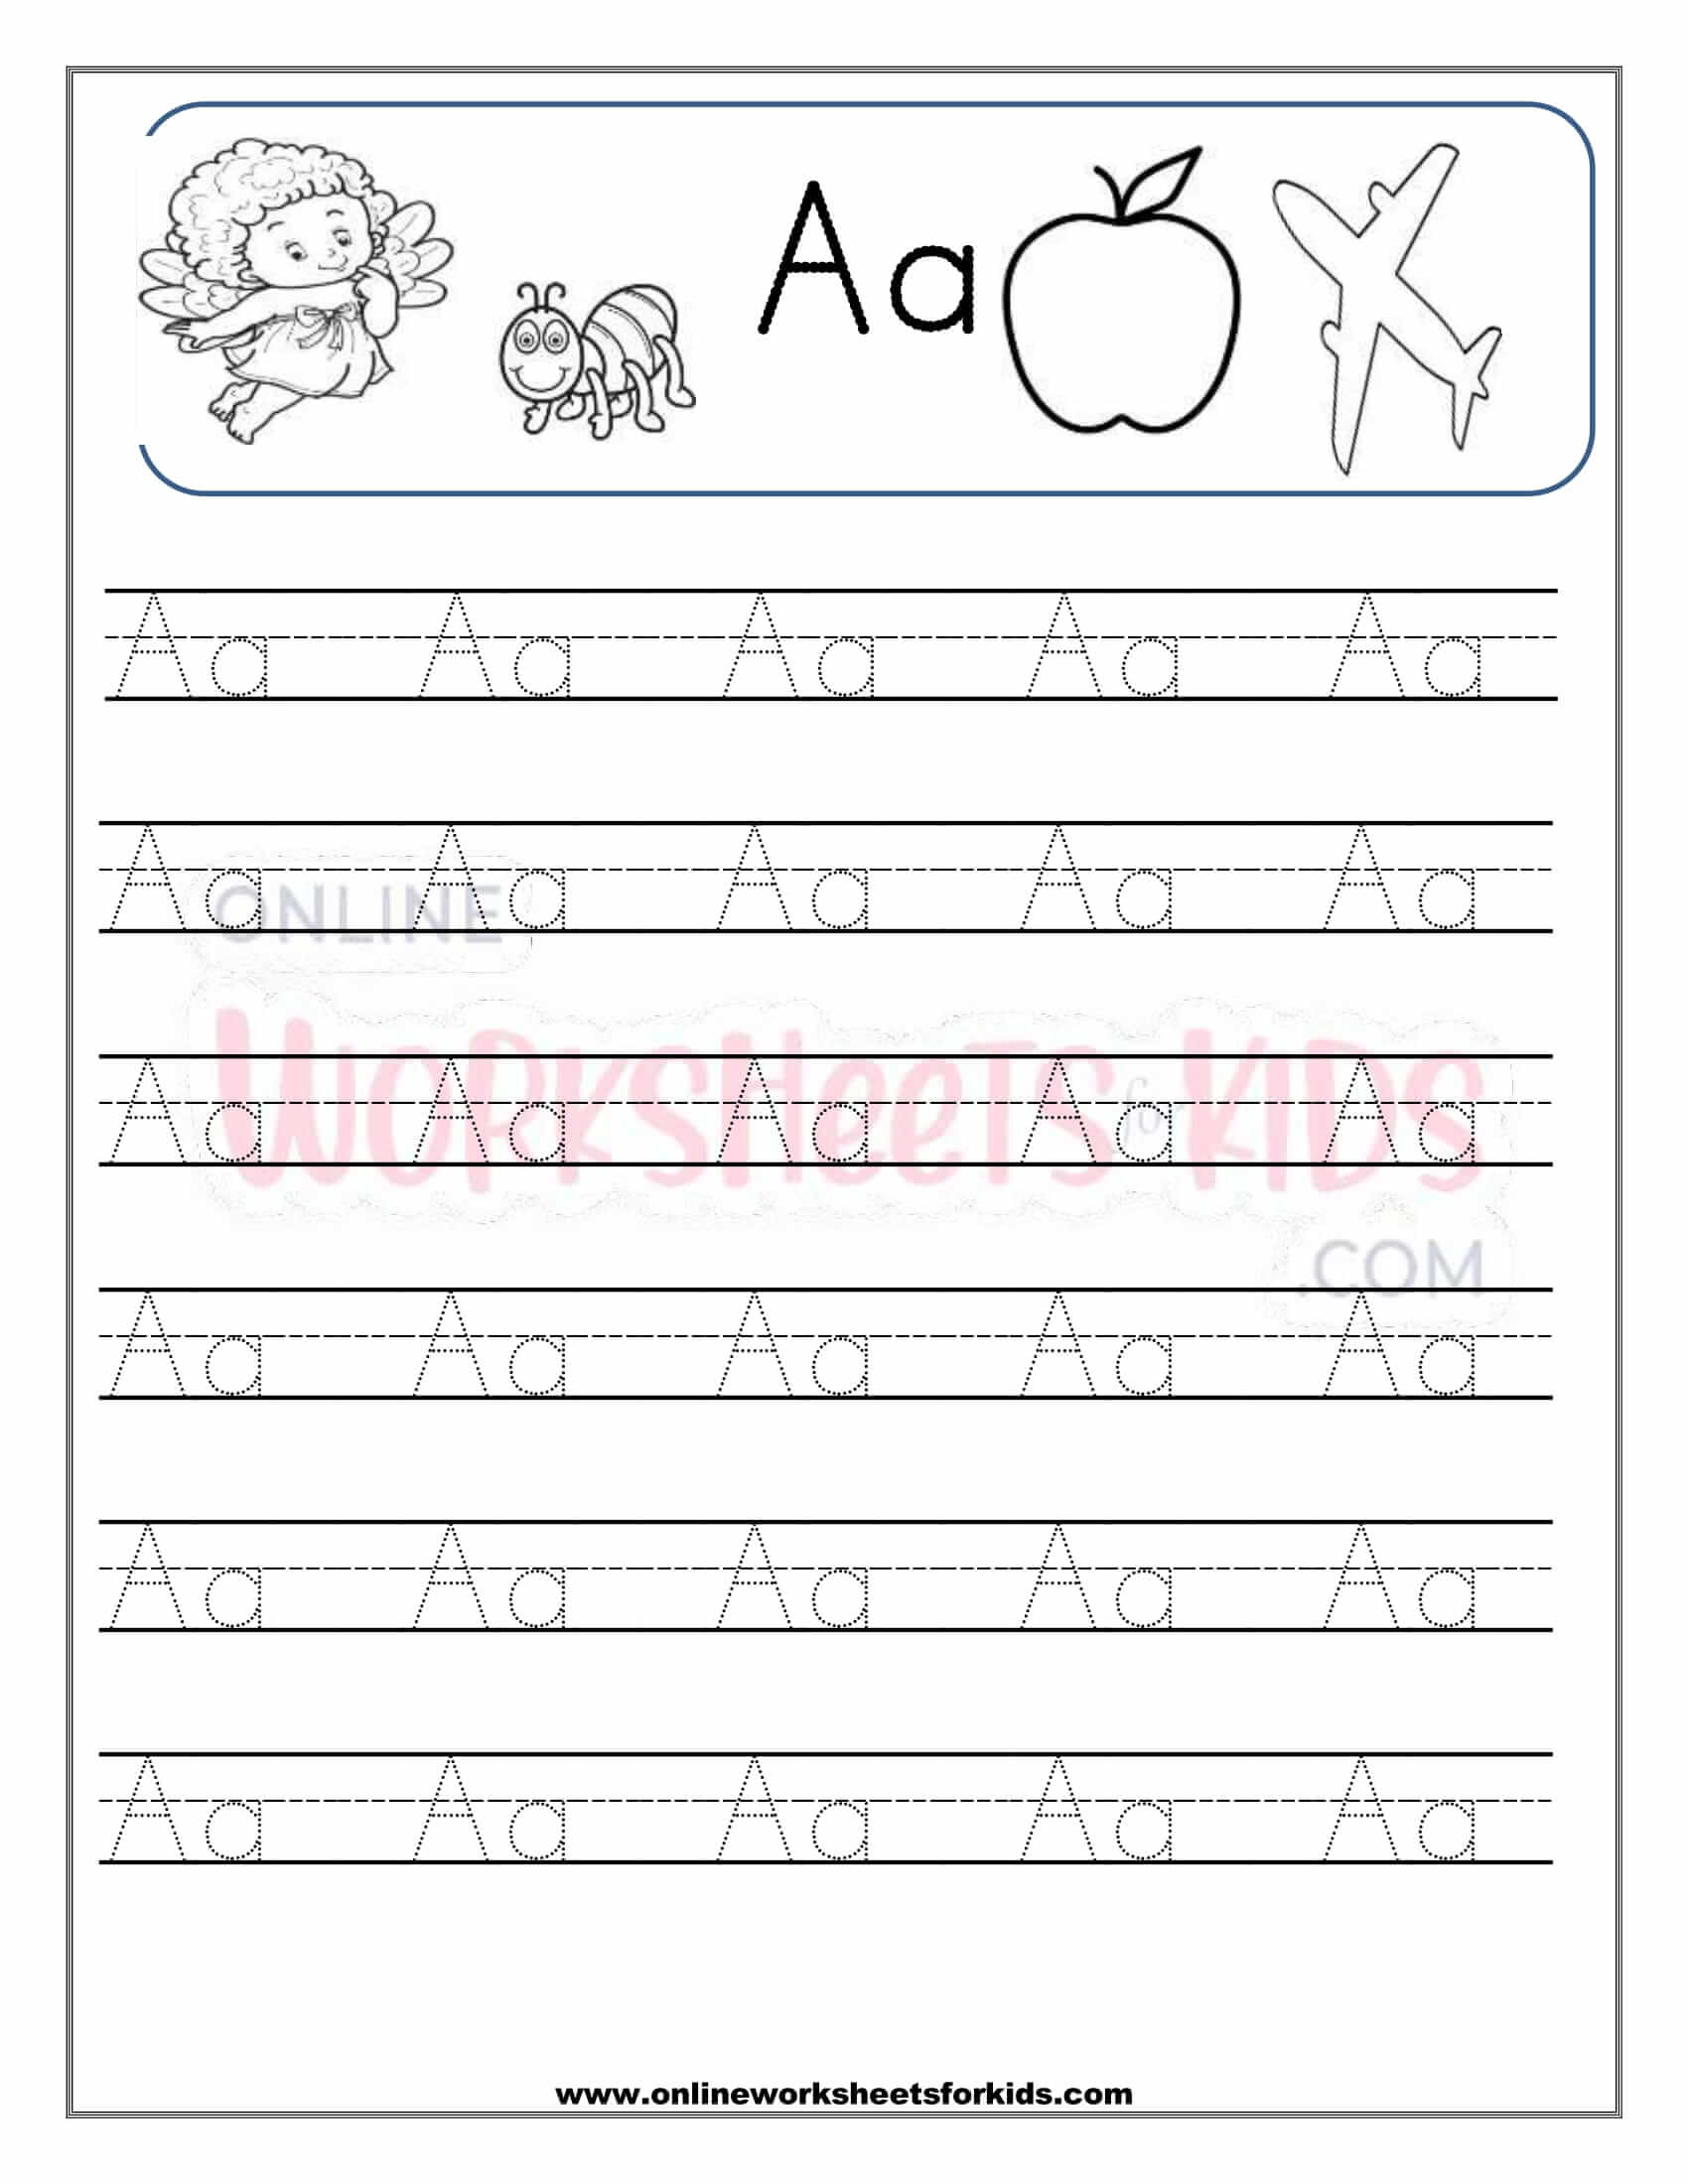 Capital And Small Letter Tracing Worksheet 1